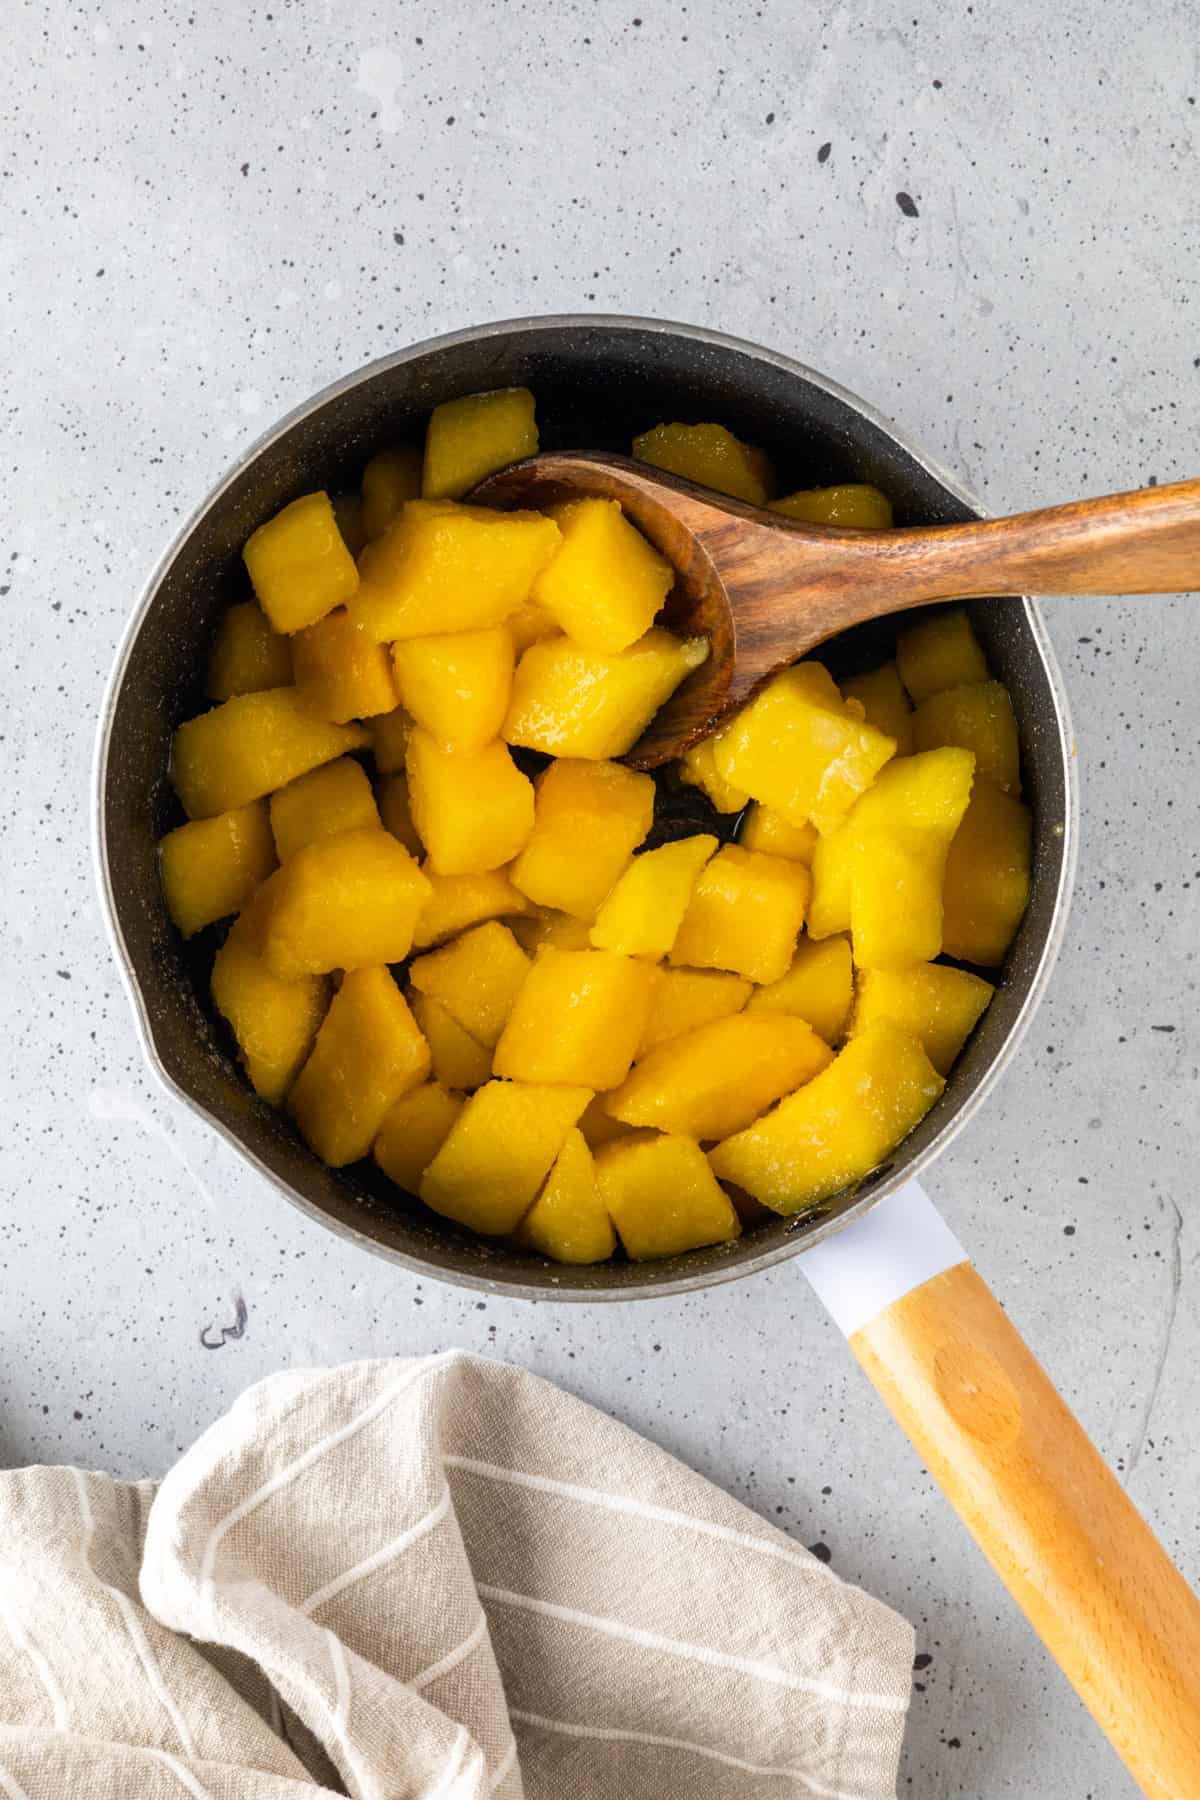 Sugar and lime juice-coated mango chunks in a small saucepan with a wooden spoon.